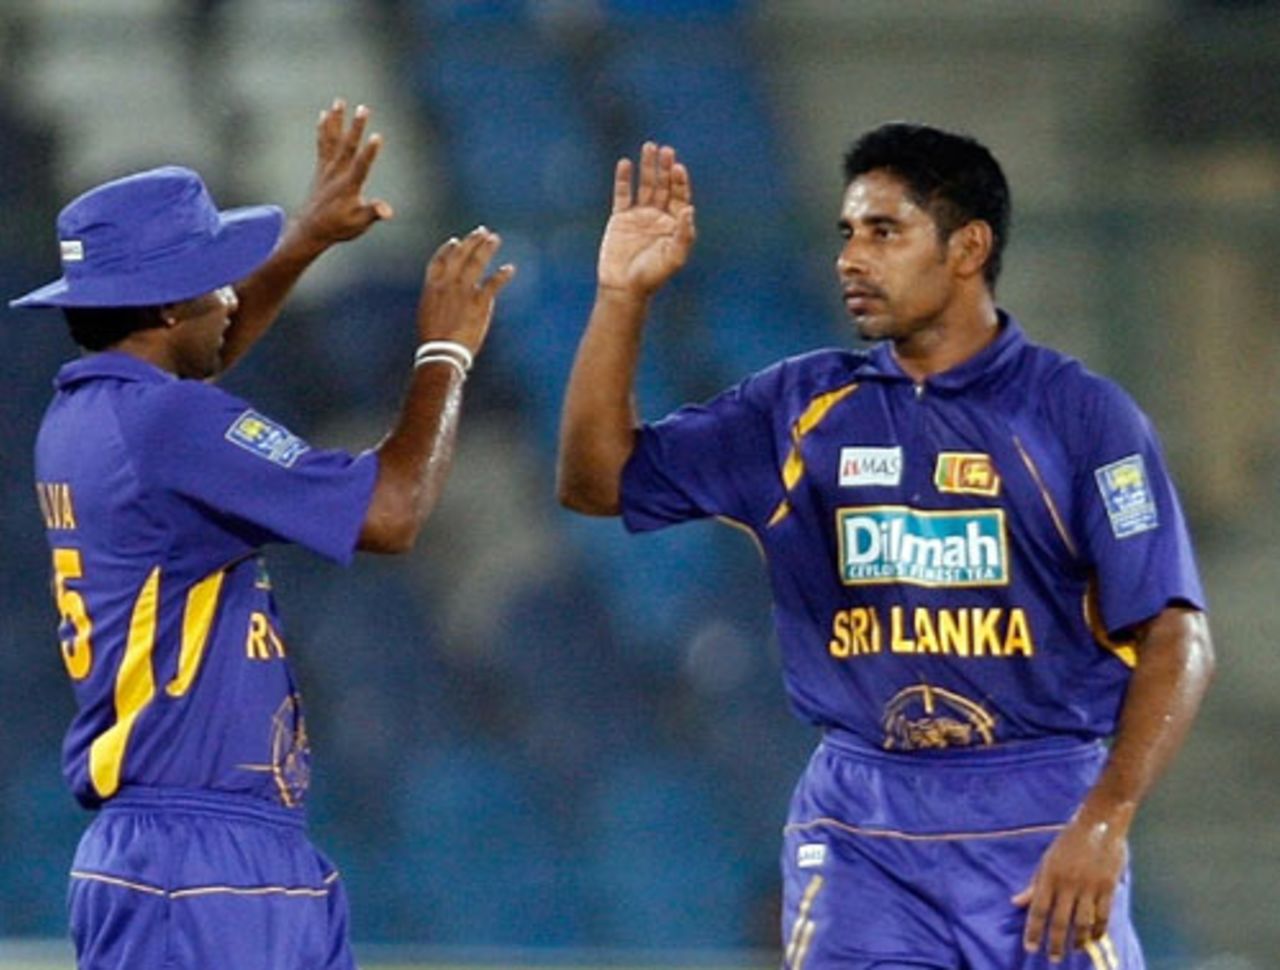 Chaminda Vaas celebrates with a team-mate after getting the first wicket, Bangladesh v Sri Lanka, Super Four, Asia Cup, Karachi, June 30, 2008